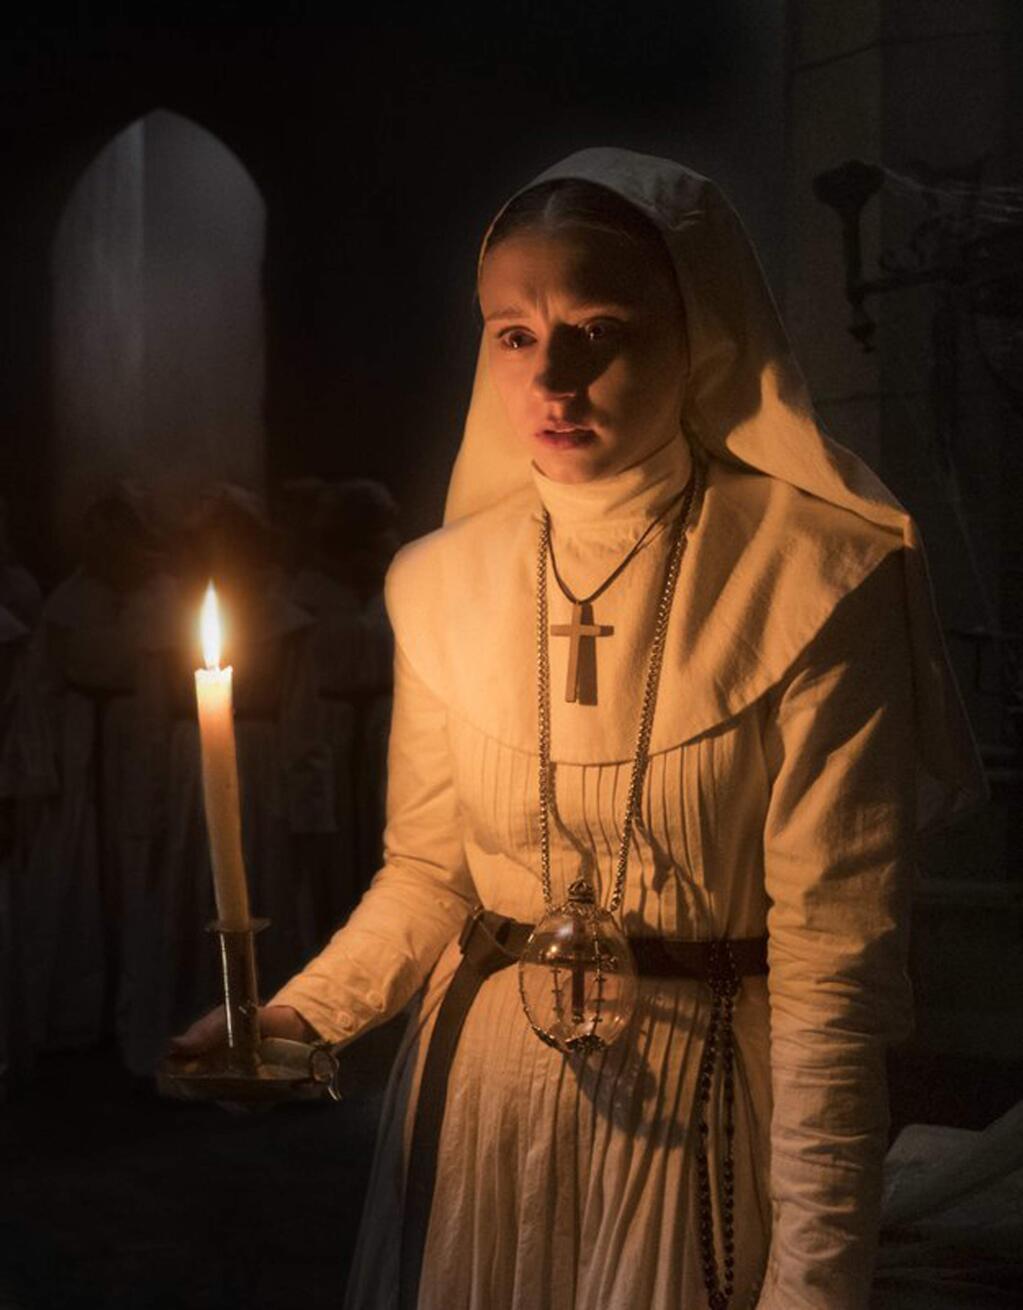 Taissa Farmiga, whose sister Vera starred in 'The Conjuring,' plays Irene, a novitiate sent by the Vatican to help investigate the suicide of a young nun at a cloistered abbey in 'The Nun.' (Dustin Lubin/Warner Bros.)